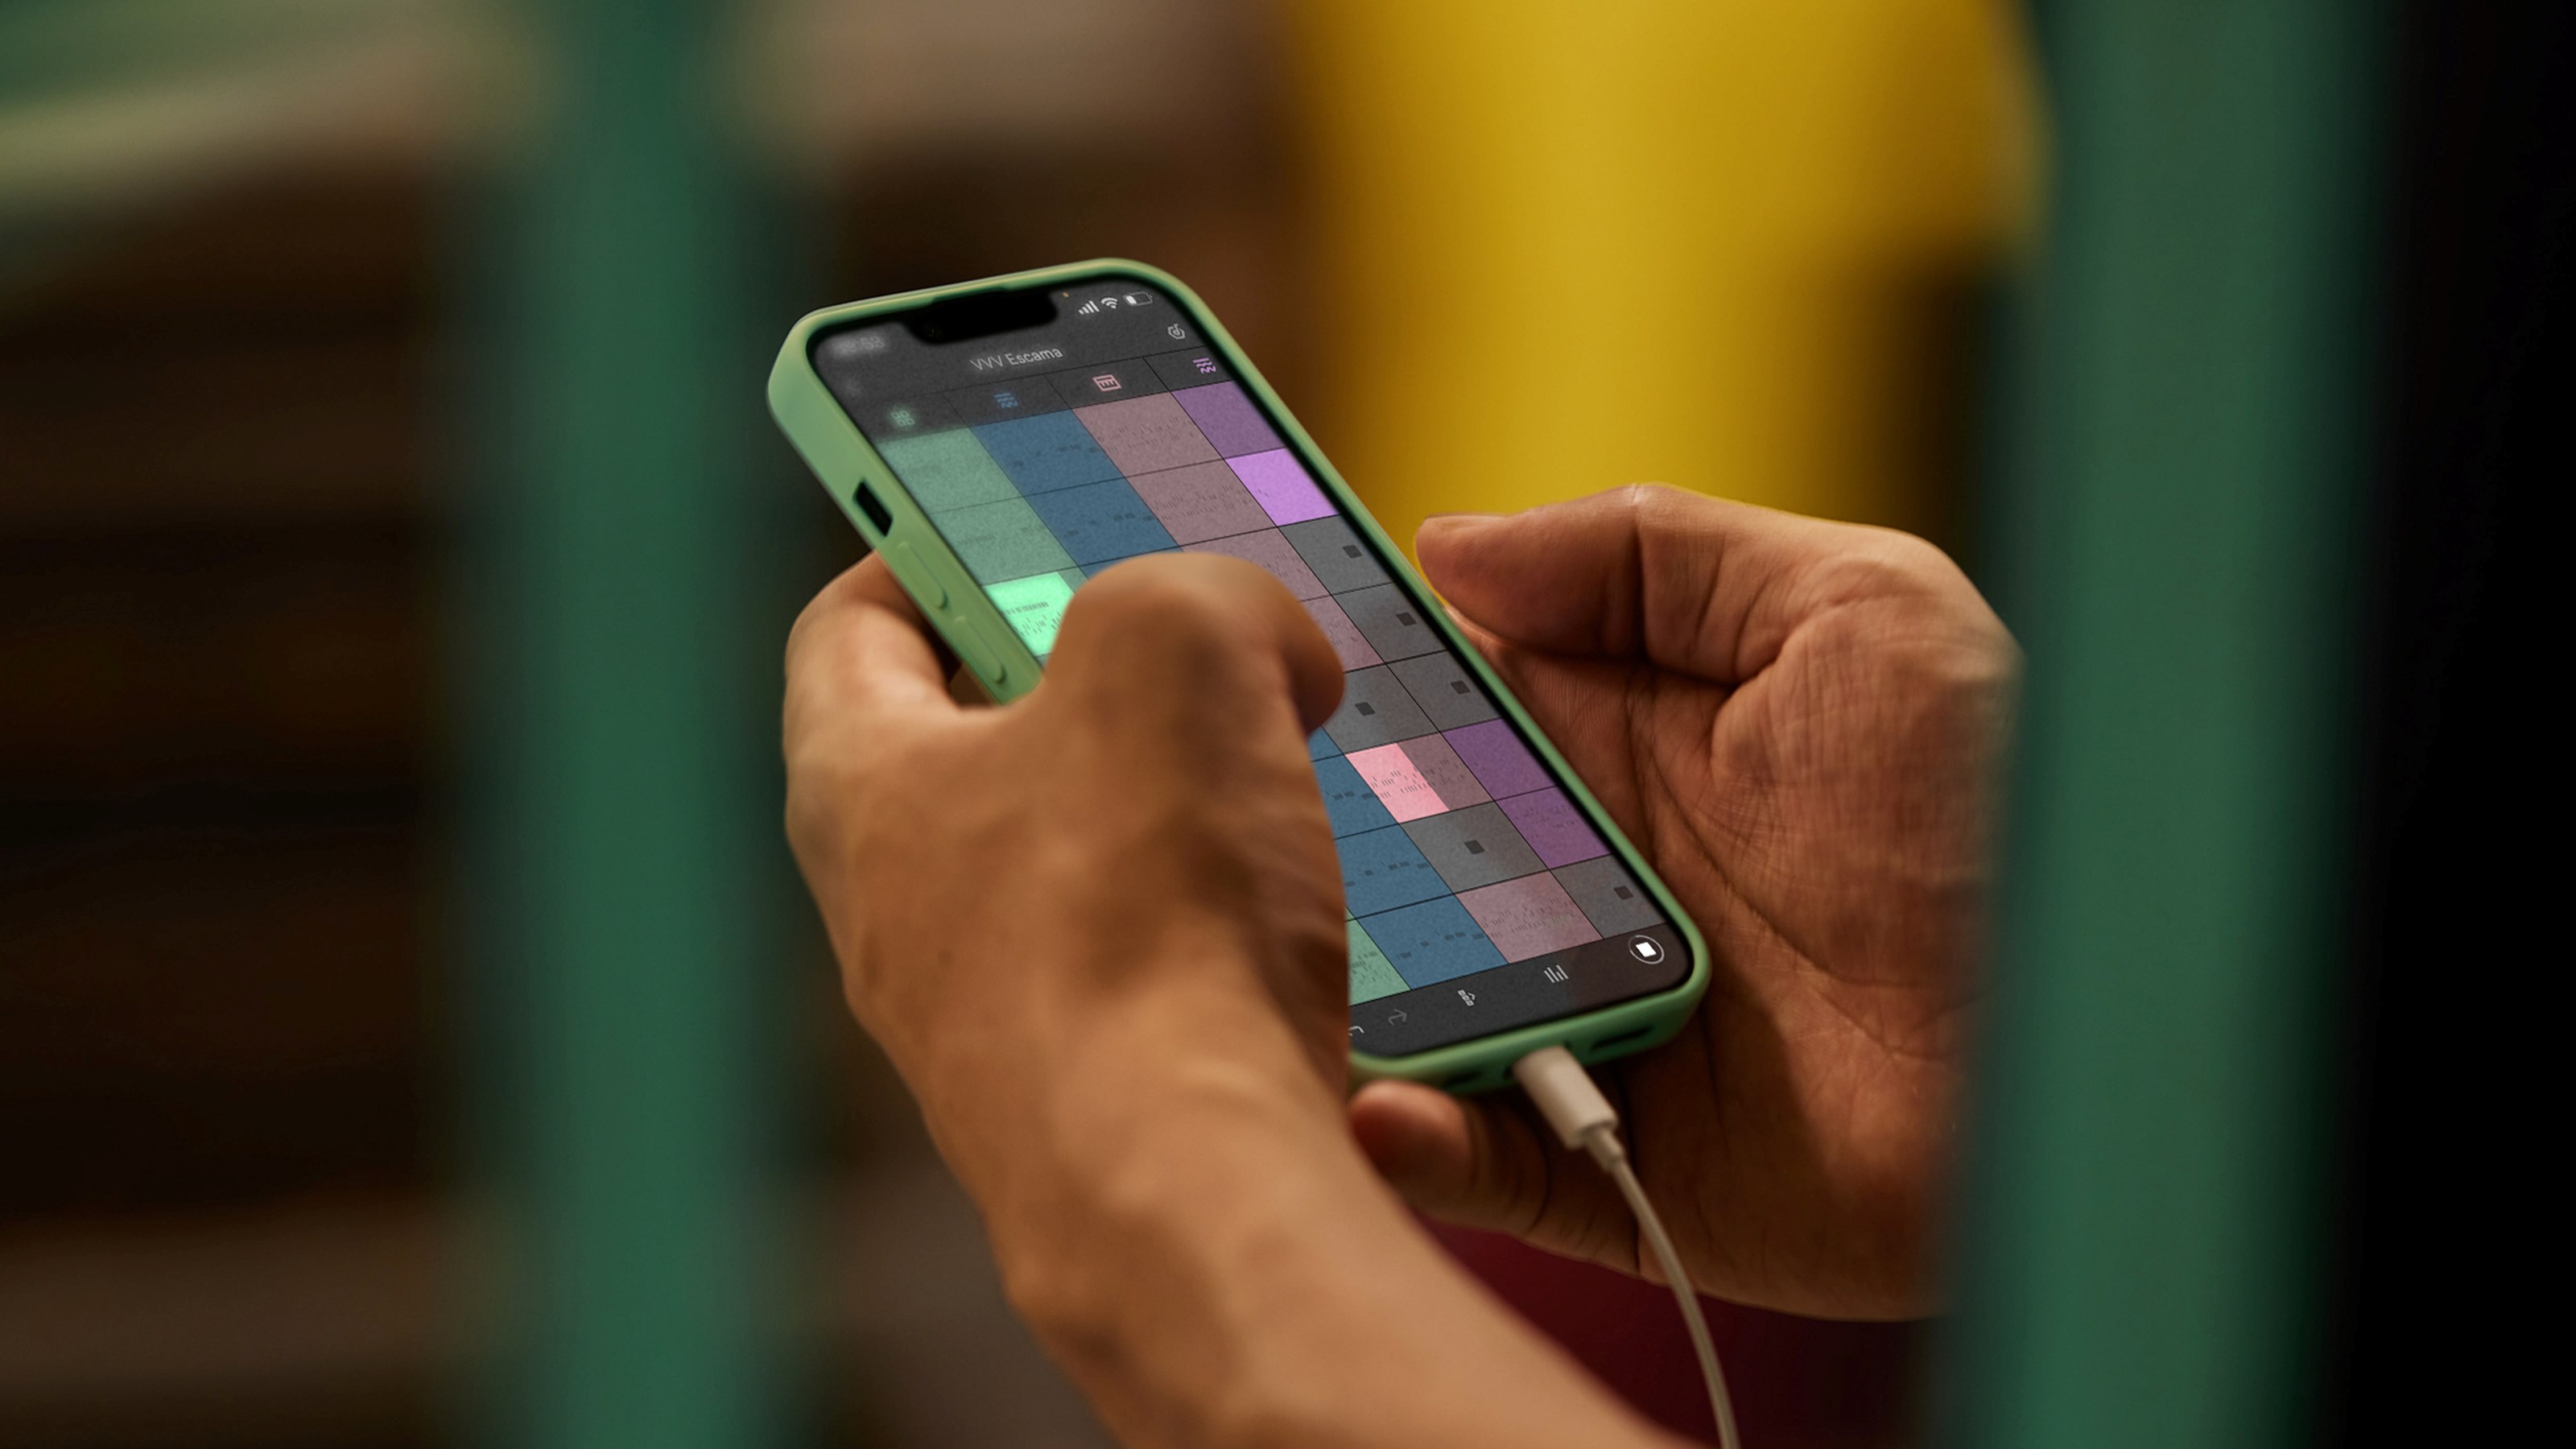 How Ableton Note Attempts To Reinvent Audio Apps Again, This Time On Mobile